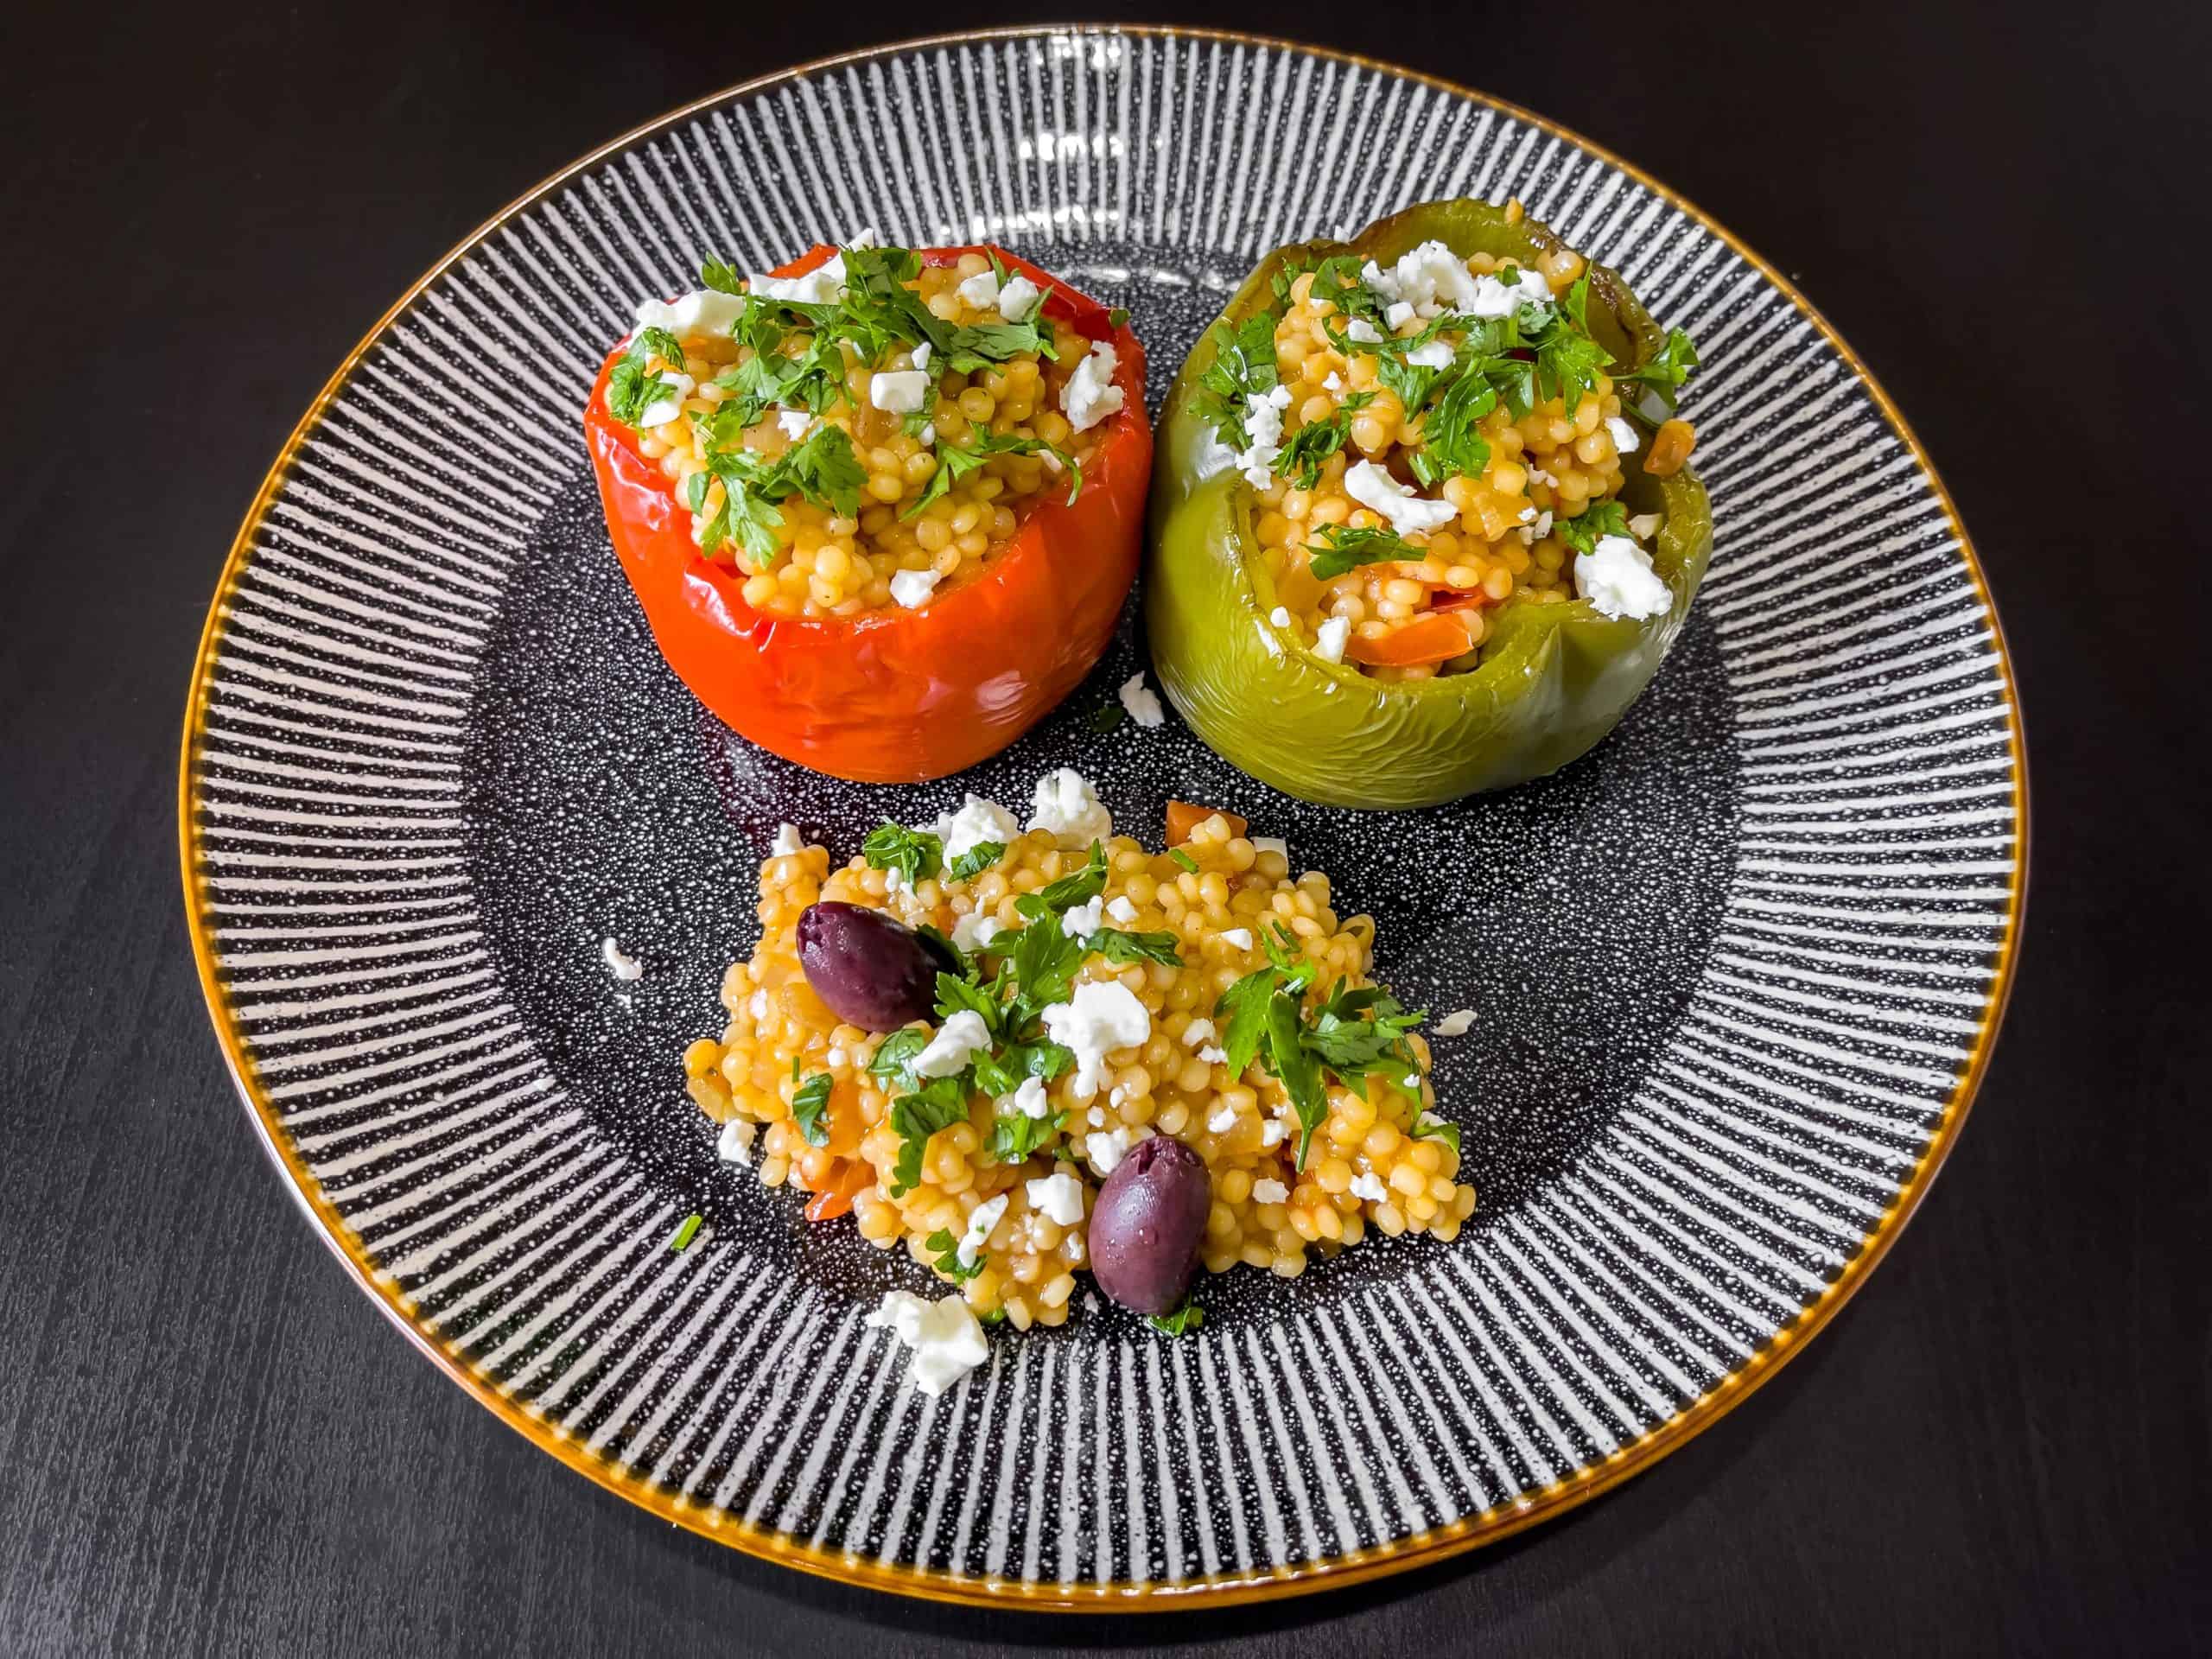 Gemista with couscous (stuffed vegetables with couscous) 2